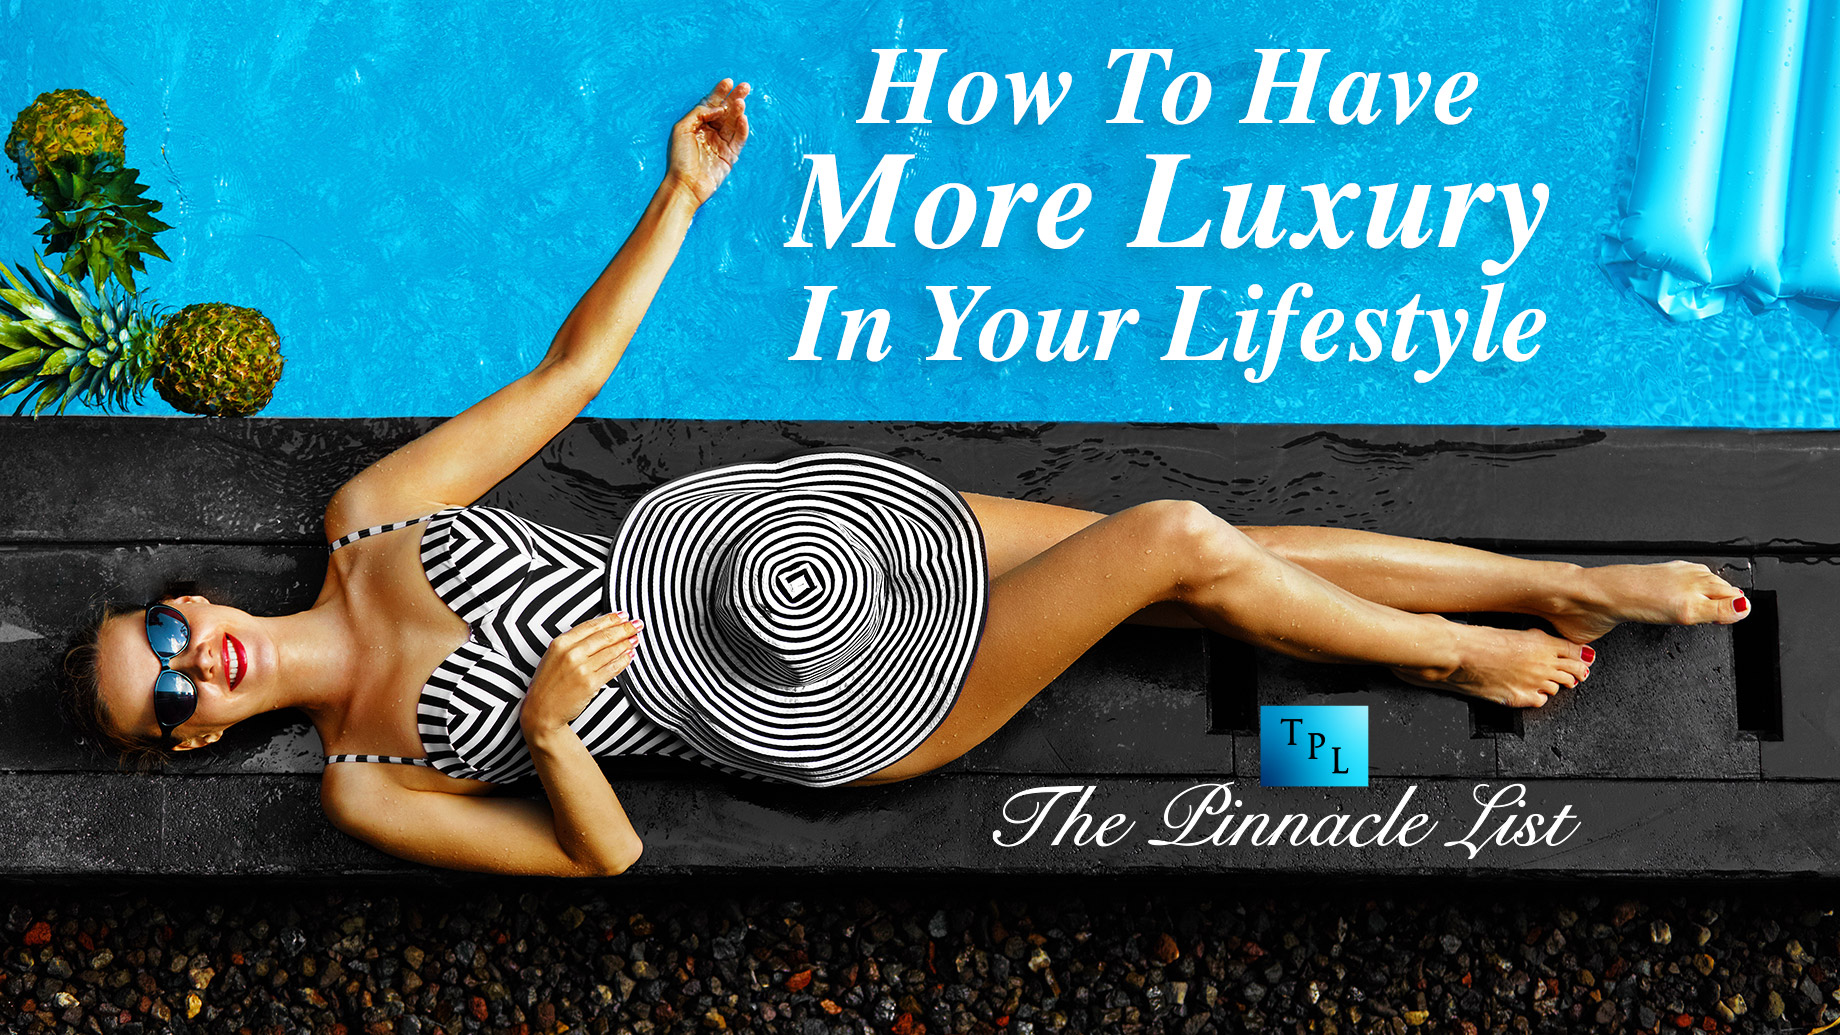 How To Have More Luxury In Your Lifestyle